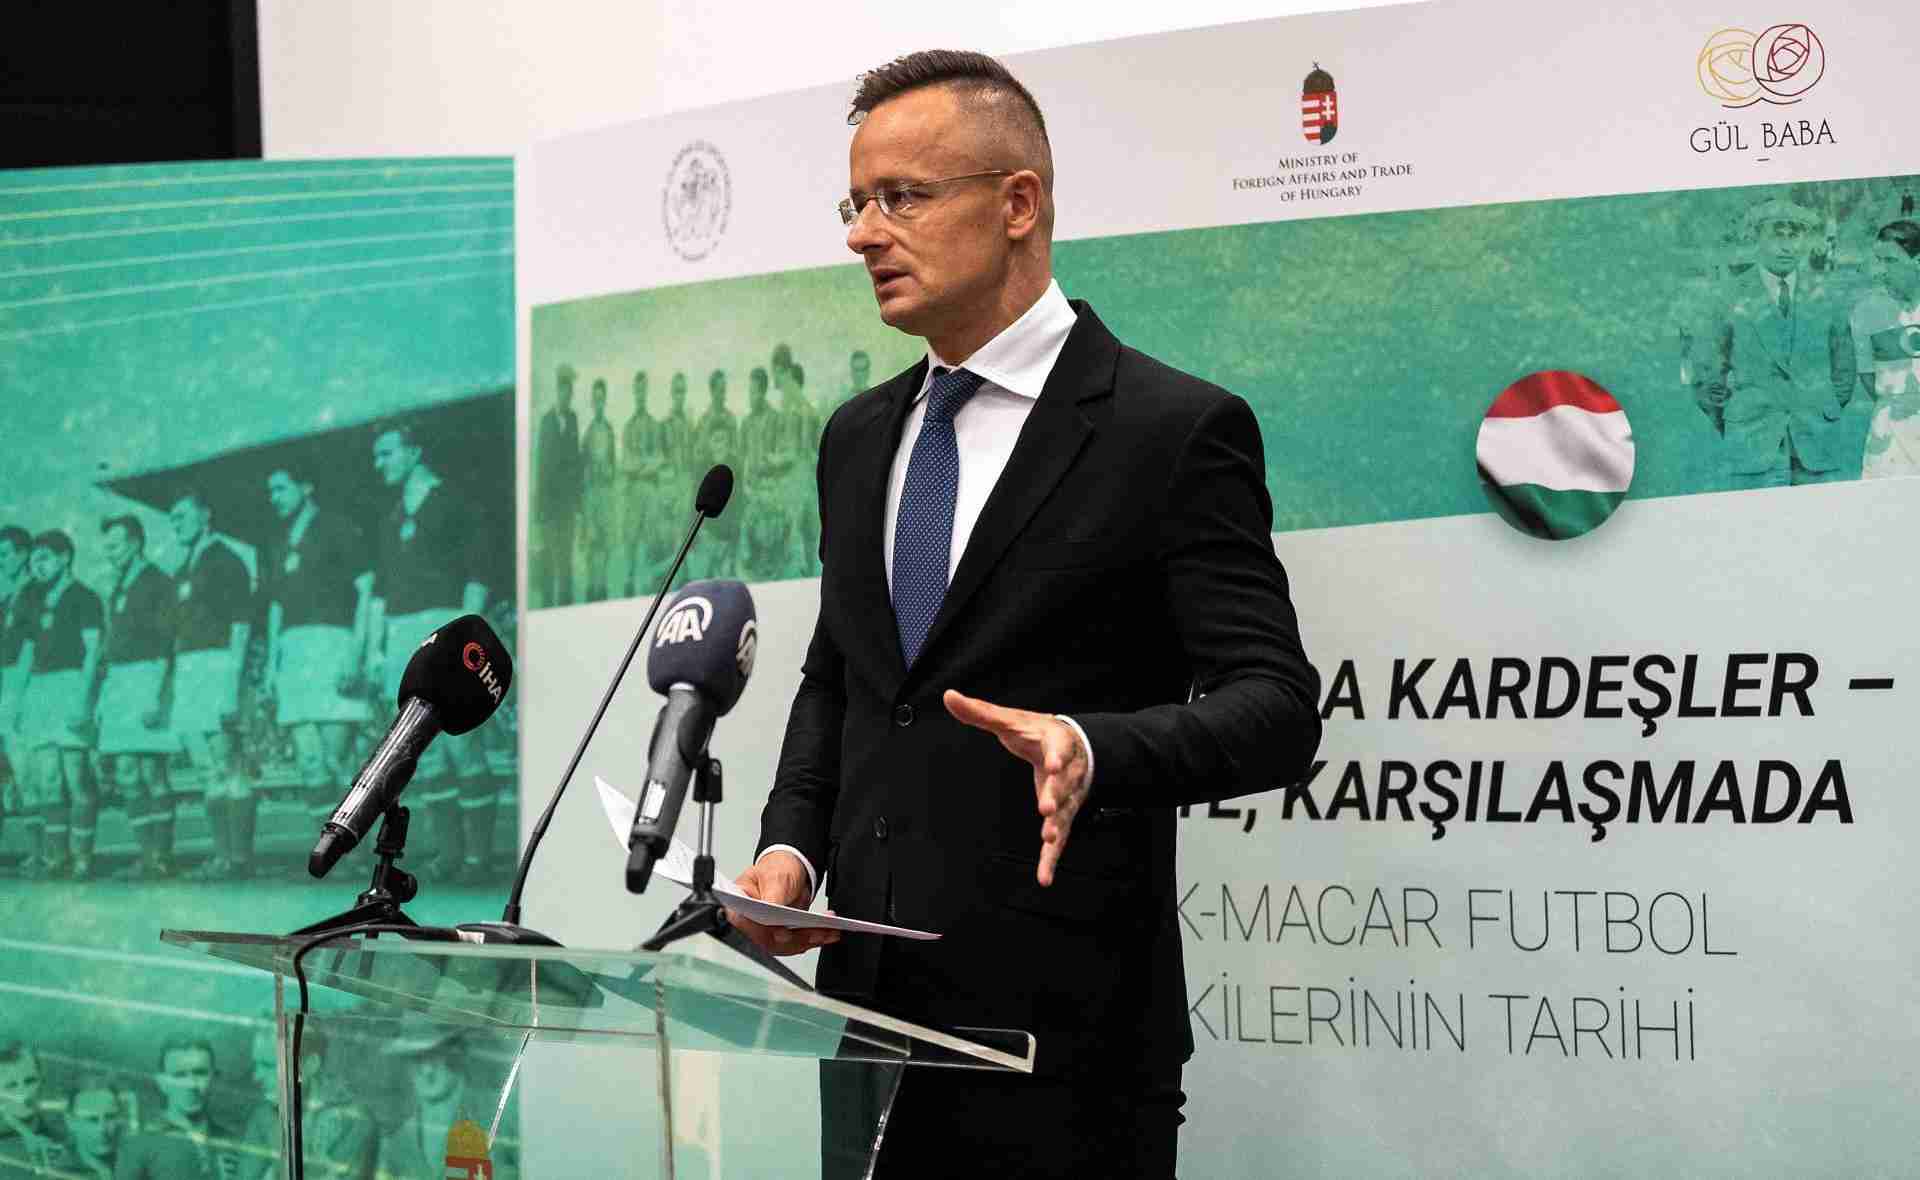 Minister of Foreign Affairs and Trade Péter Szijjártó at the exhibition opening